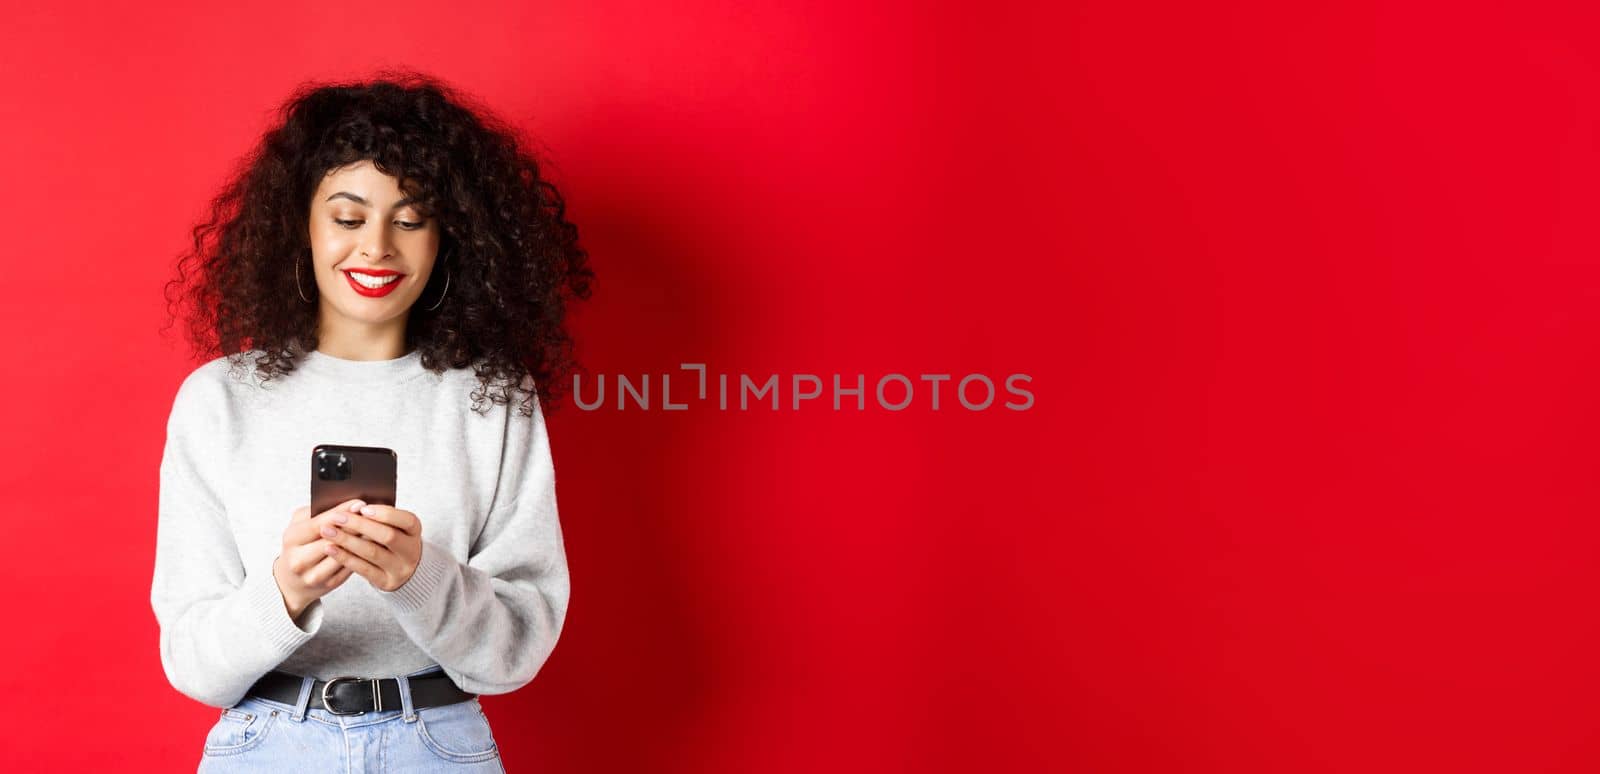 Smiling european woman reading mobile phone screen, texting a message on smartphone, standing in sweatshirt against red background.